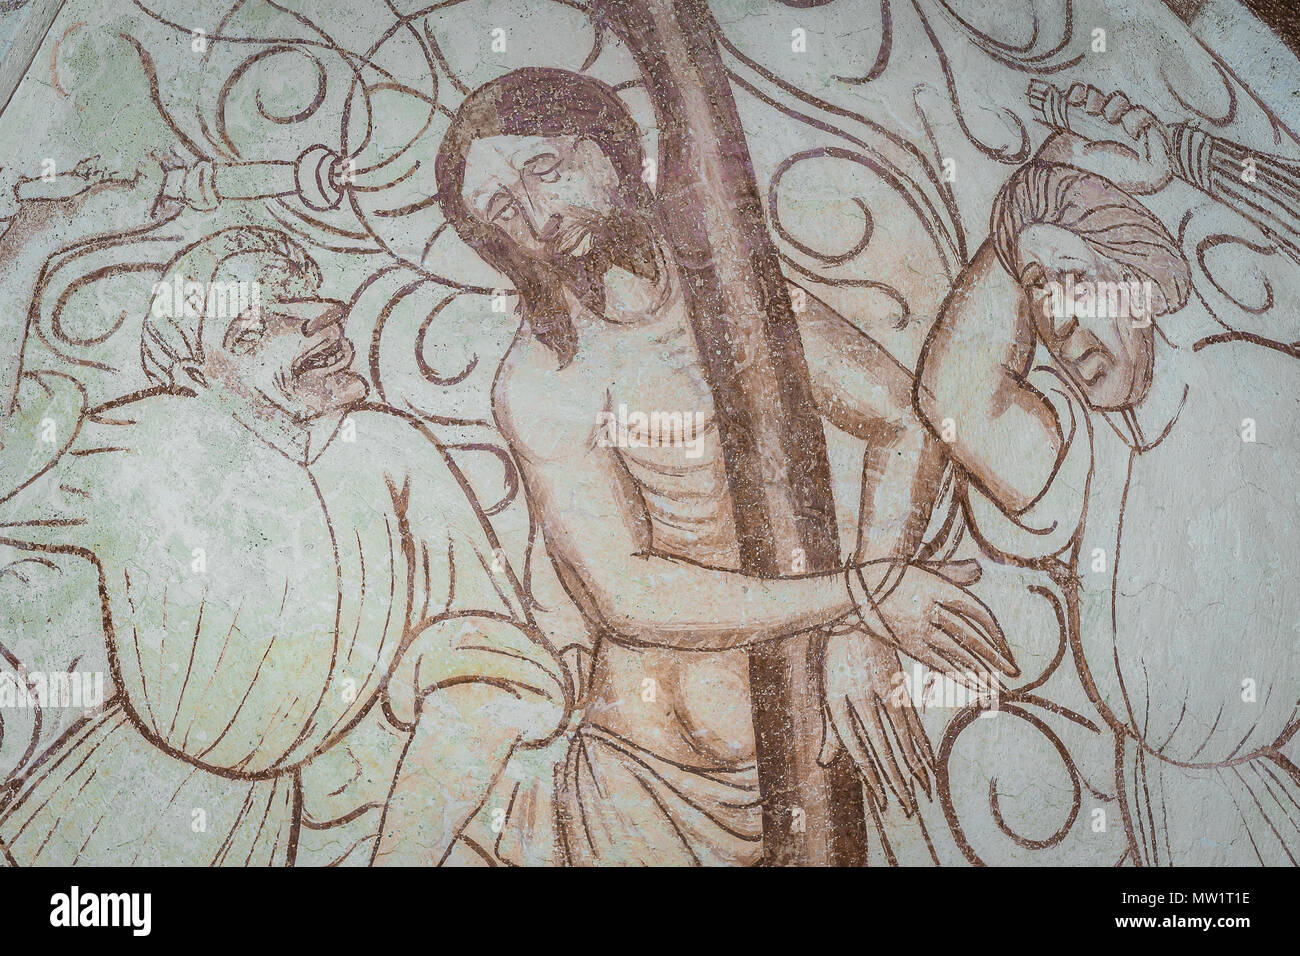 Jesus i tortured by two men, whipping him with lashes, a gothic church fresco in Bronnestad, Sweden, May 11, 2018 Stock Photo